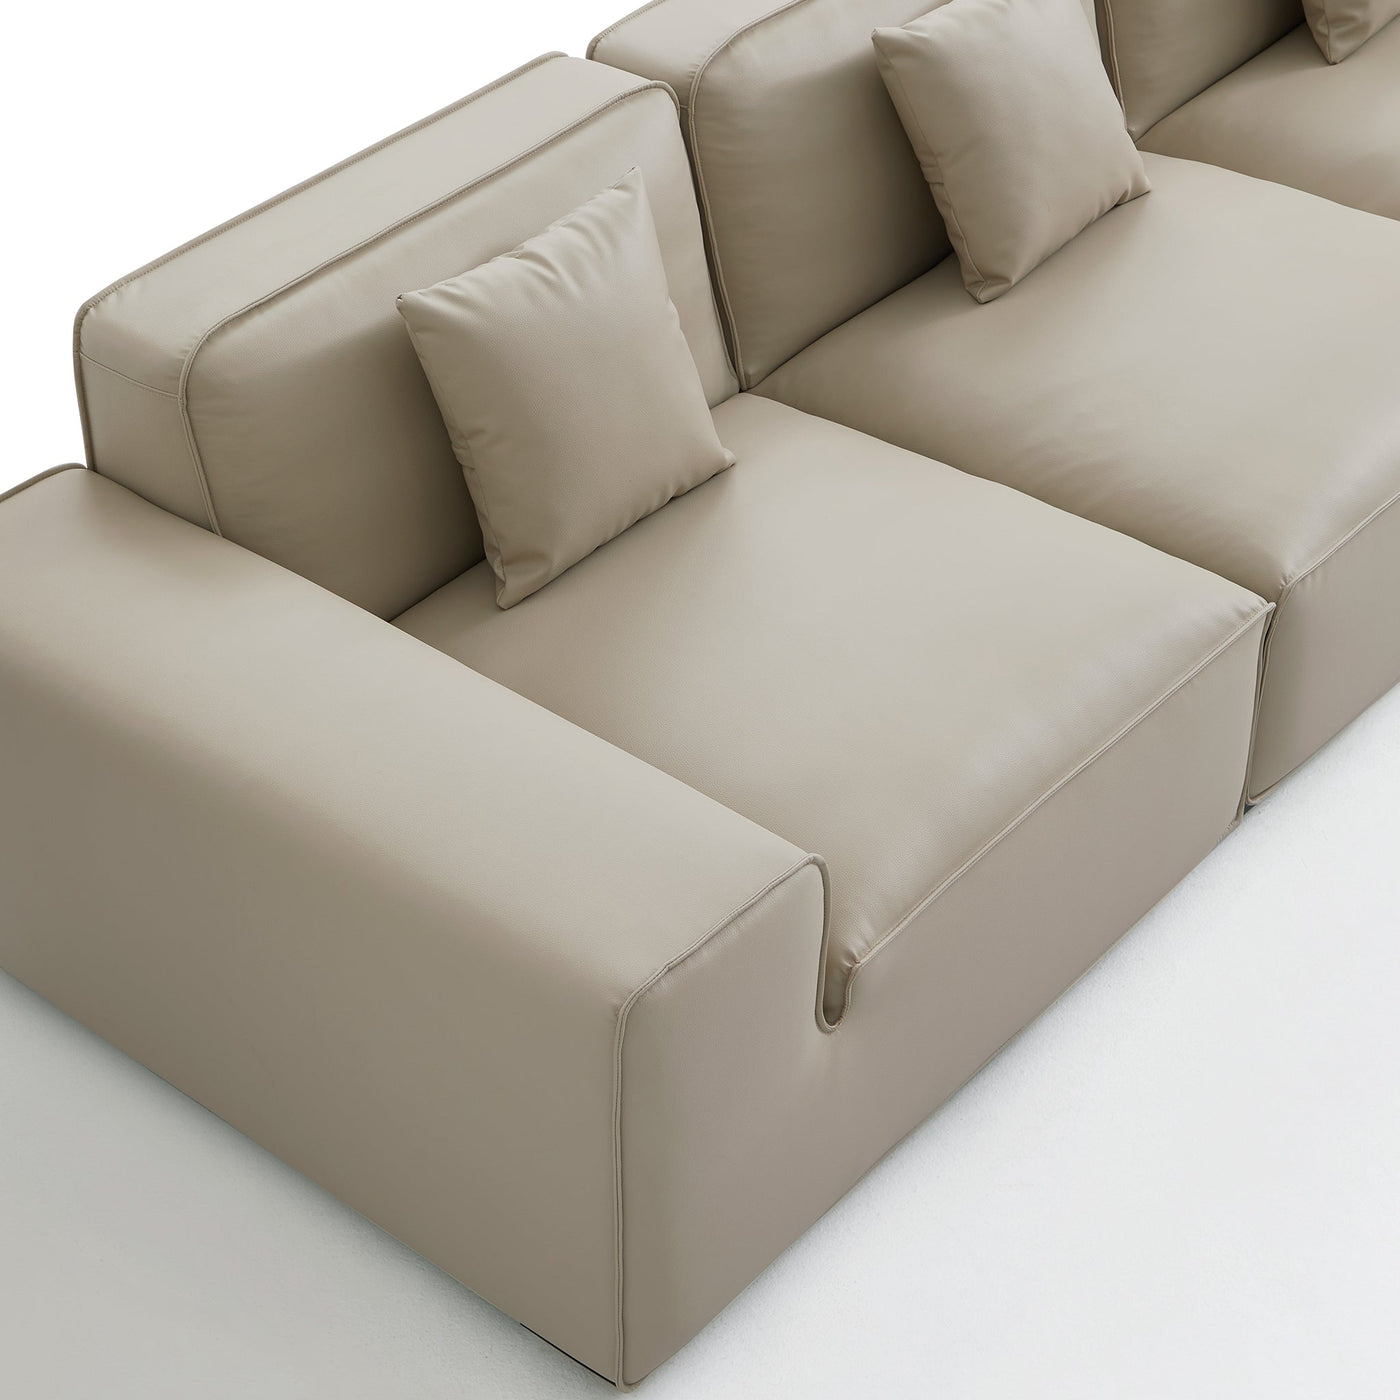 Domus Modular Beige Leather Sectional Sofa-Beige-126.0"-Facing Right